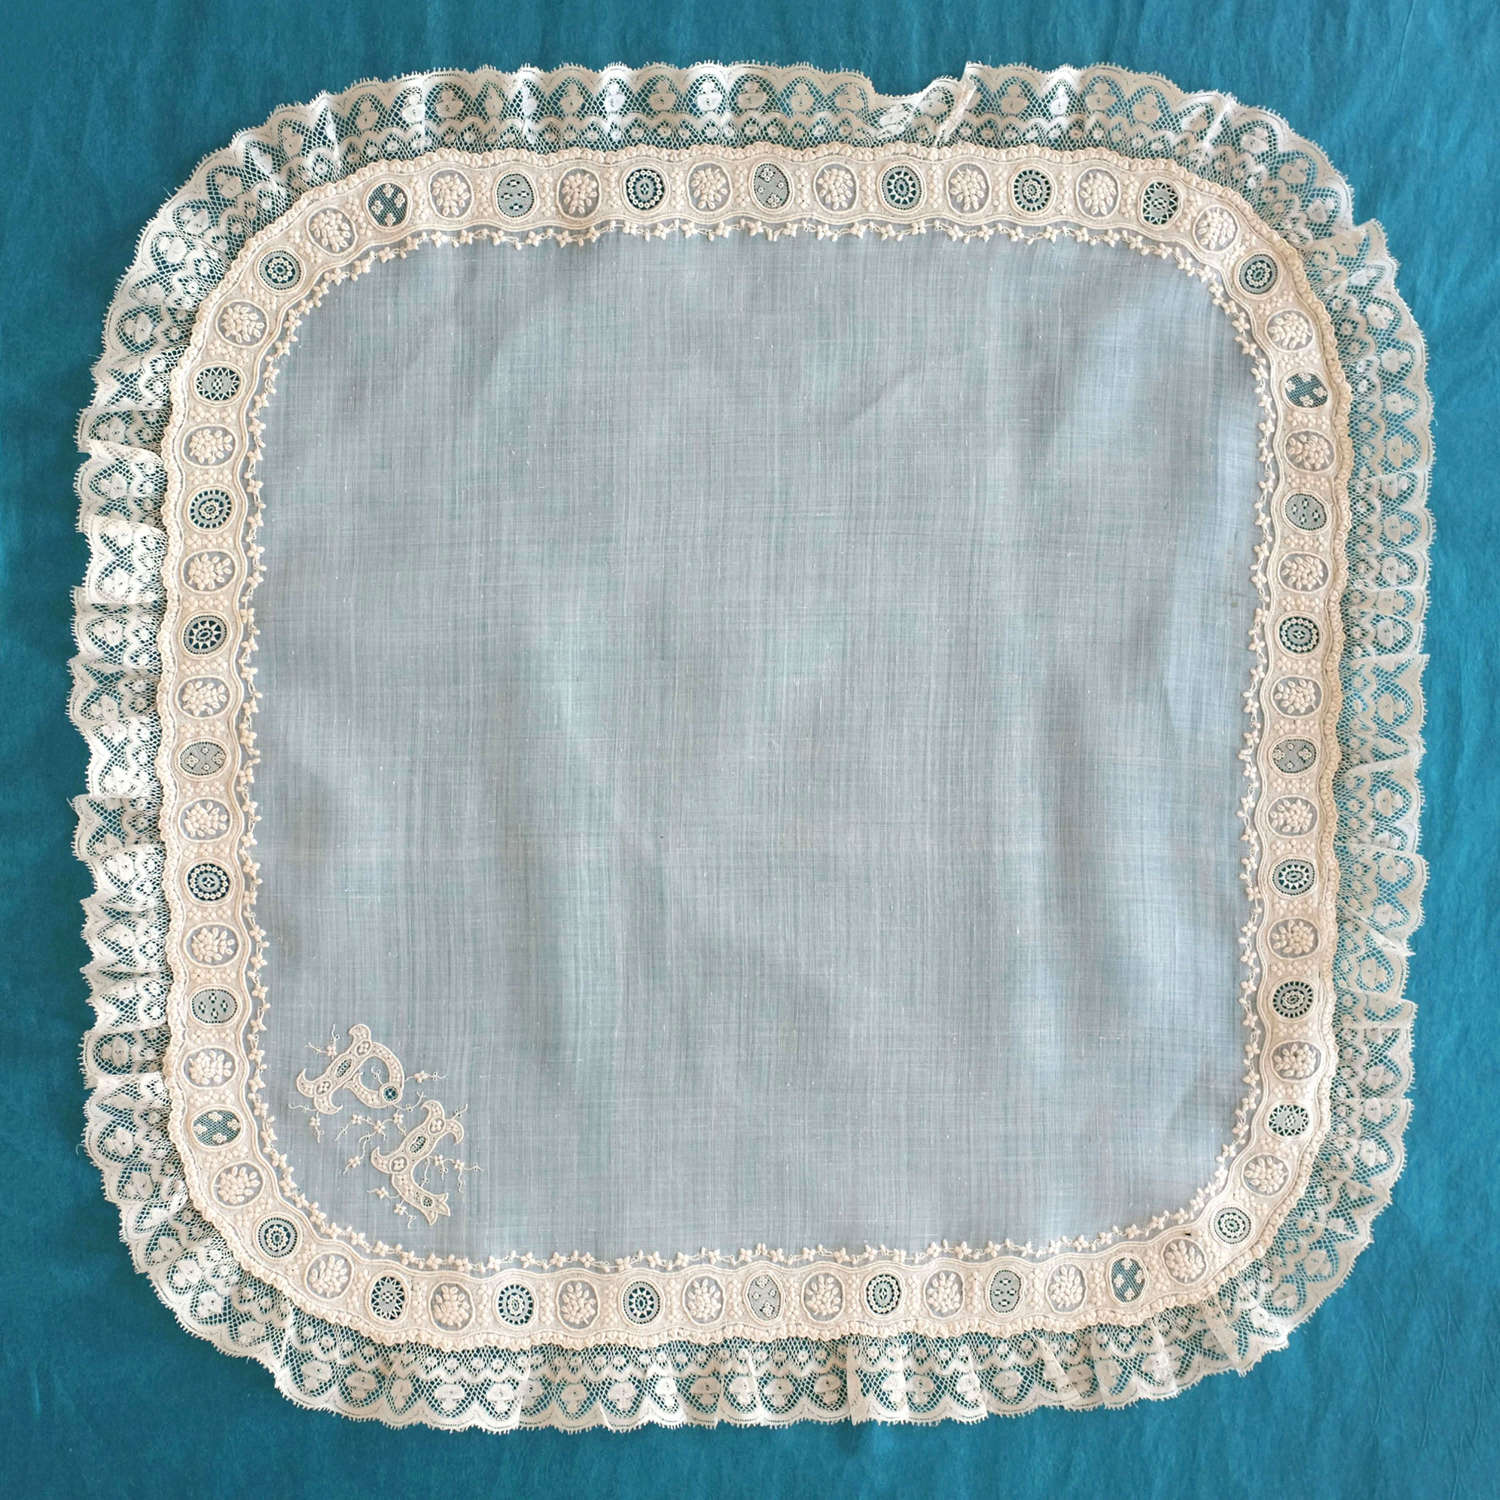 Antique Whitework and Valenciennes Lace Handkerchief